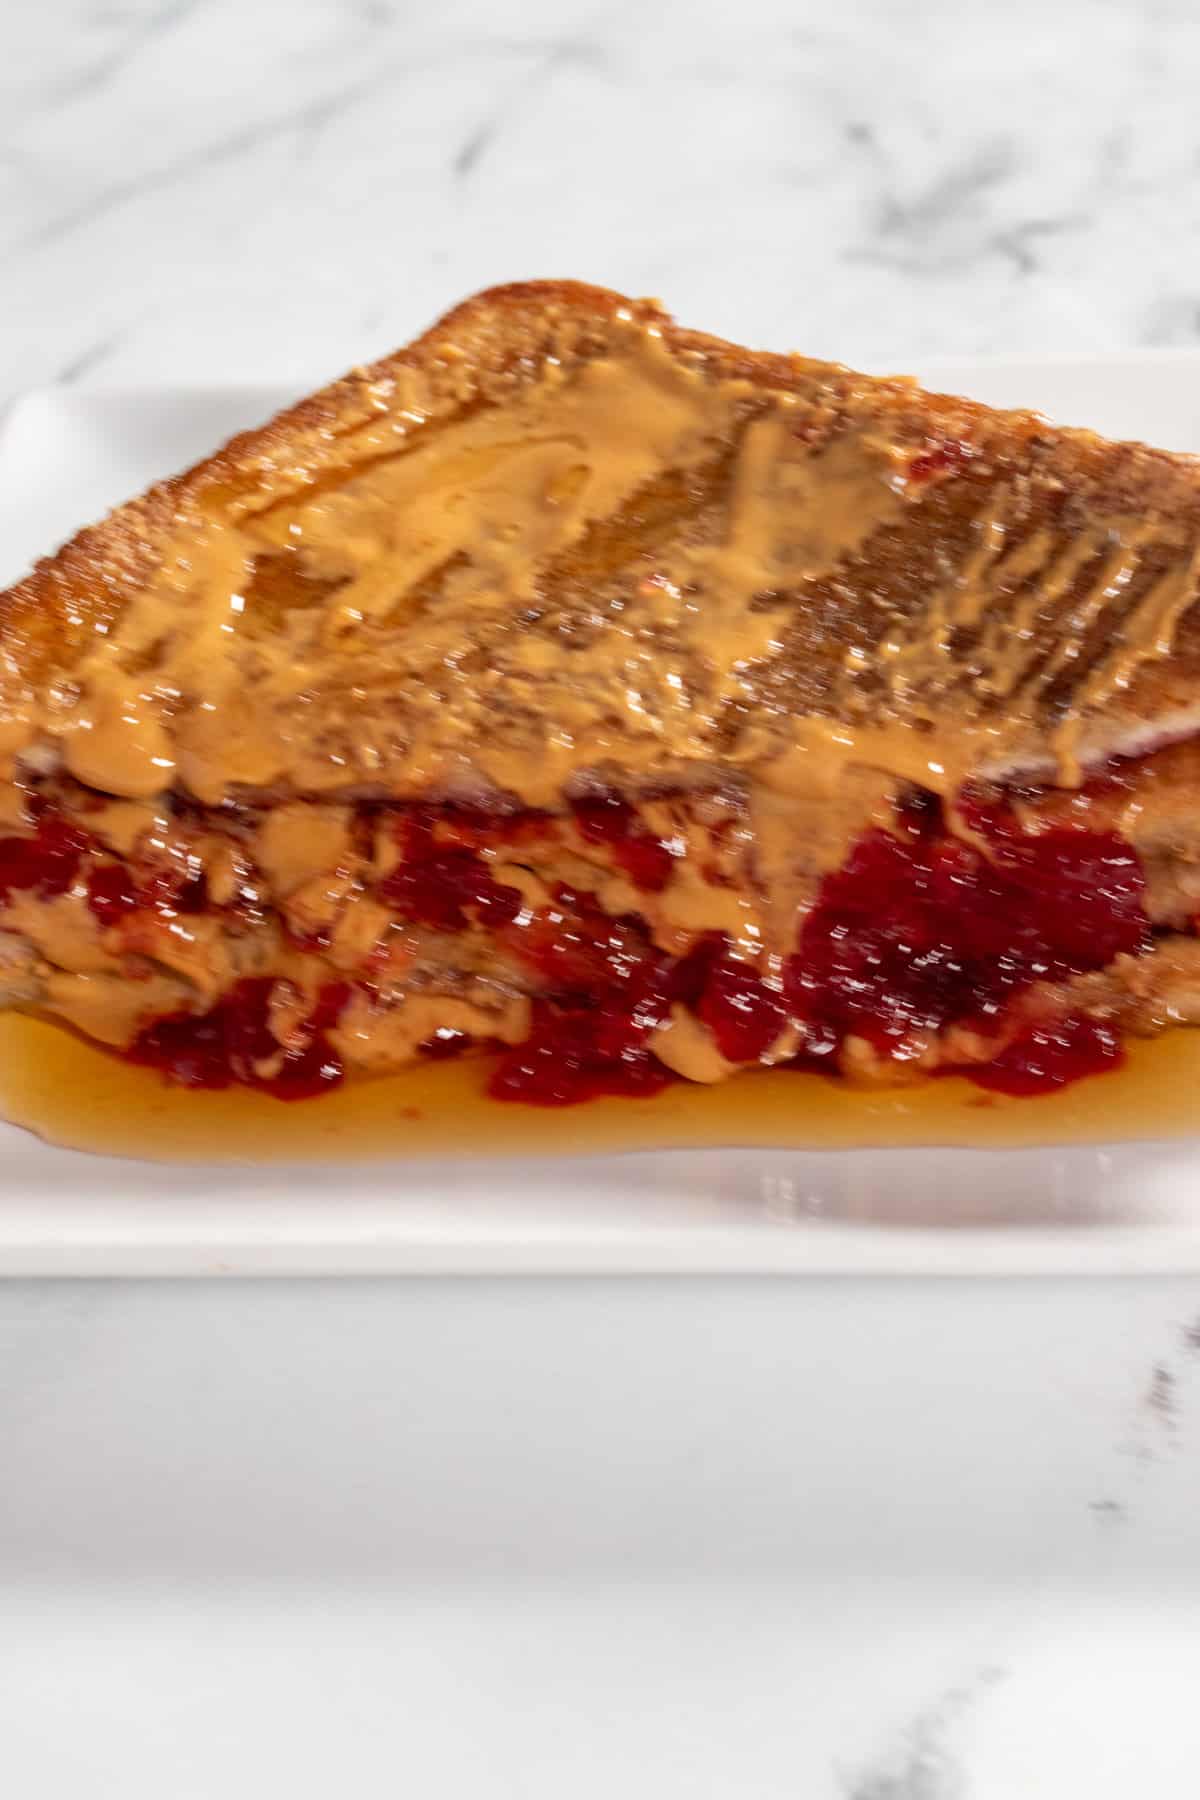 A close up of my vegan peanut butter and jelly french toast.